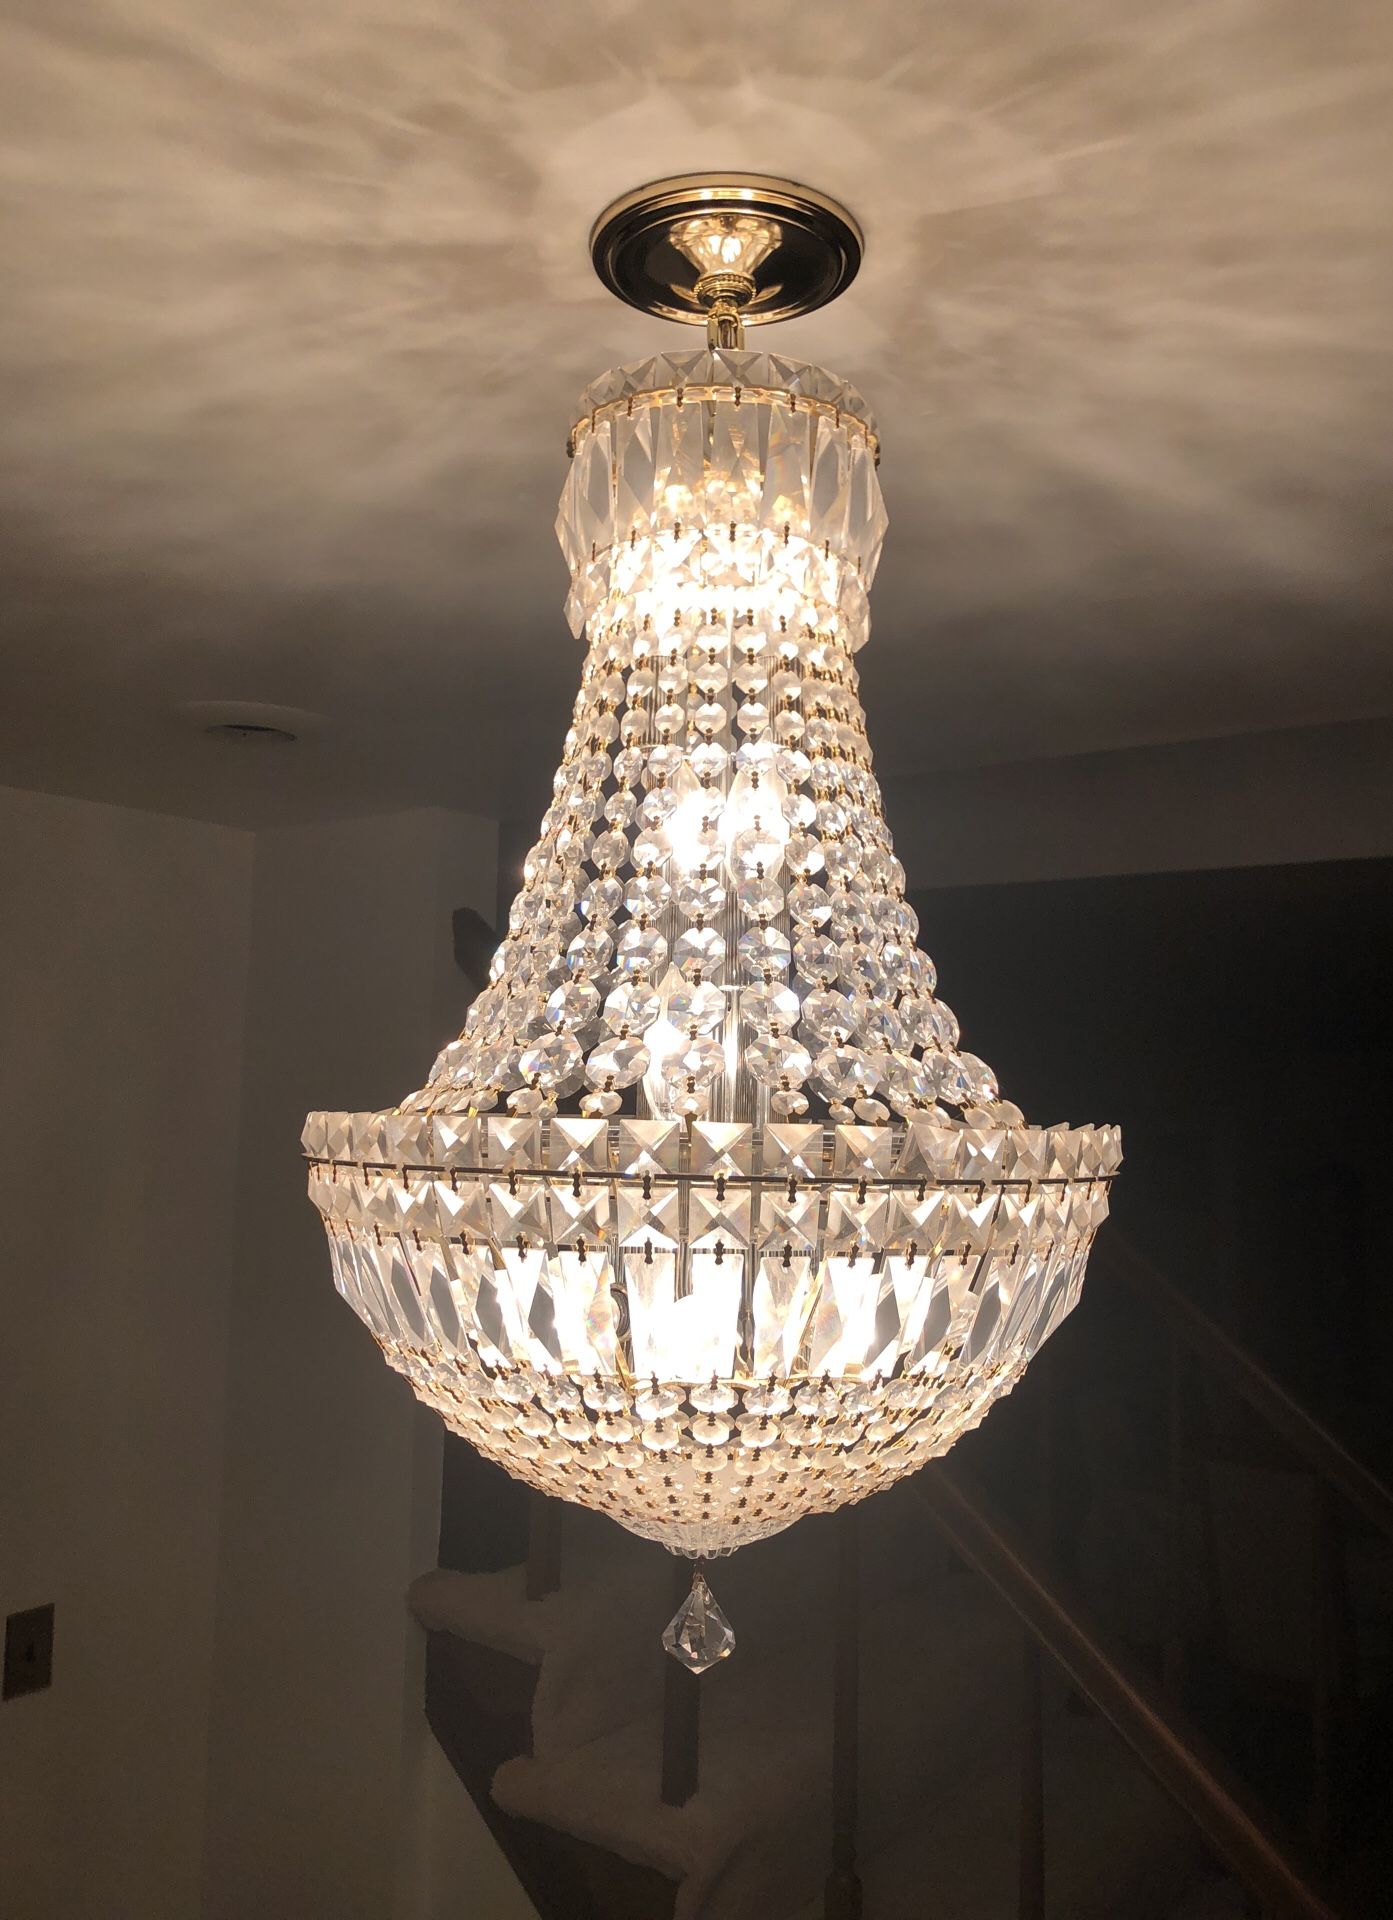 Chandelier for sale. Bulbs included.